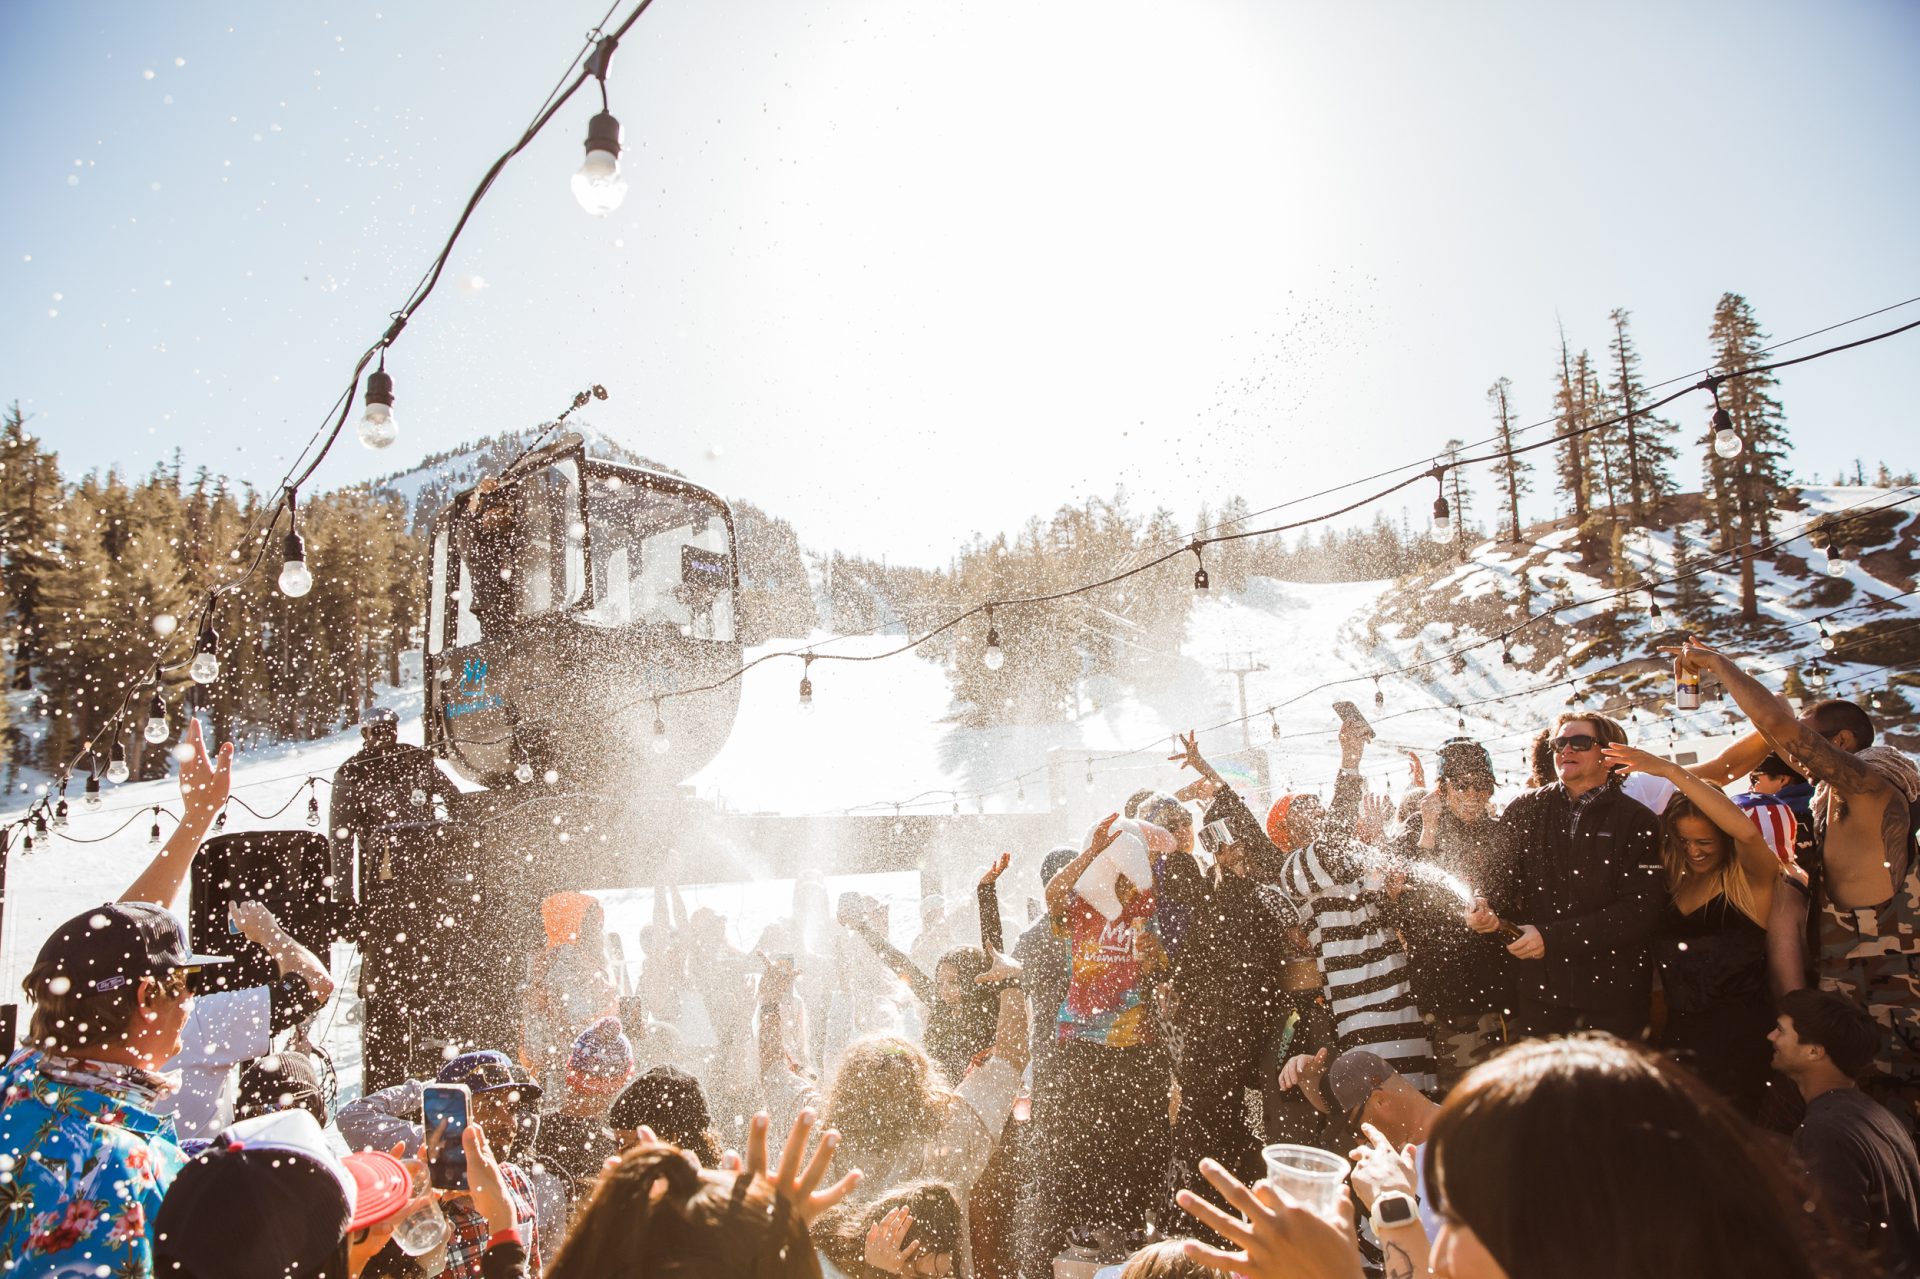 Apres party at Mammoth Mountain in spring